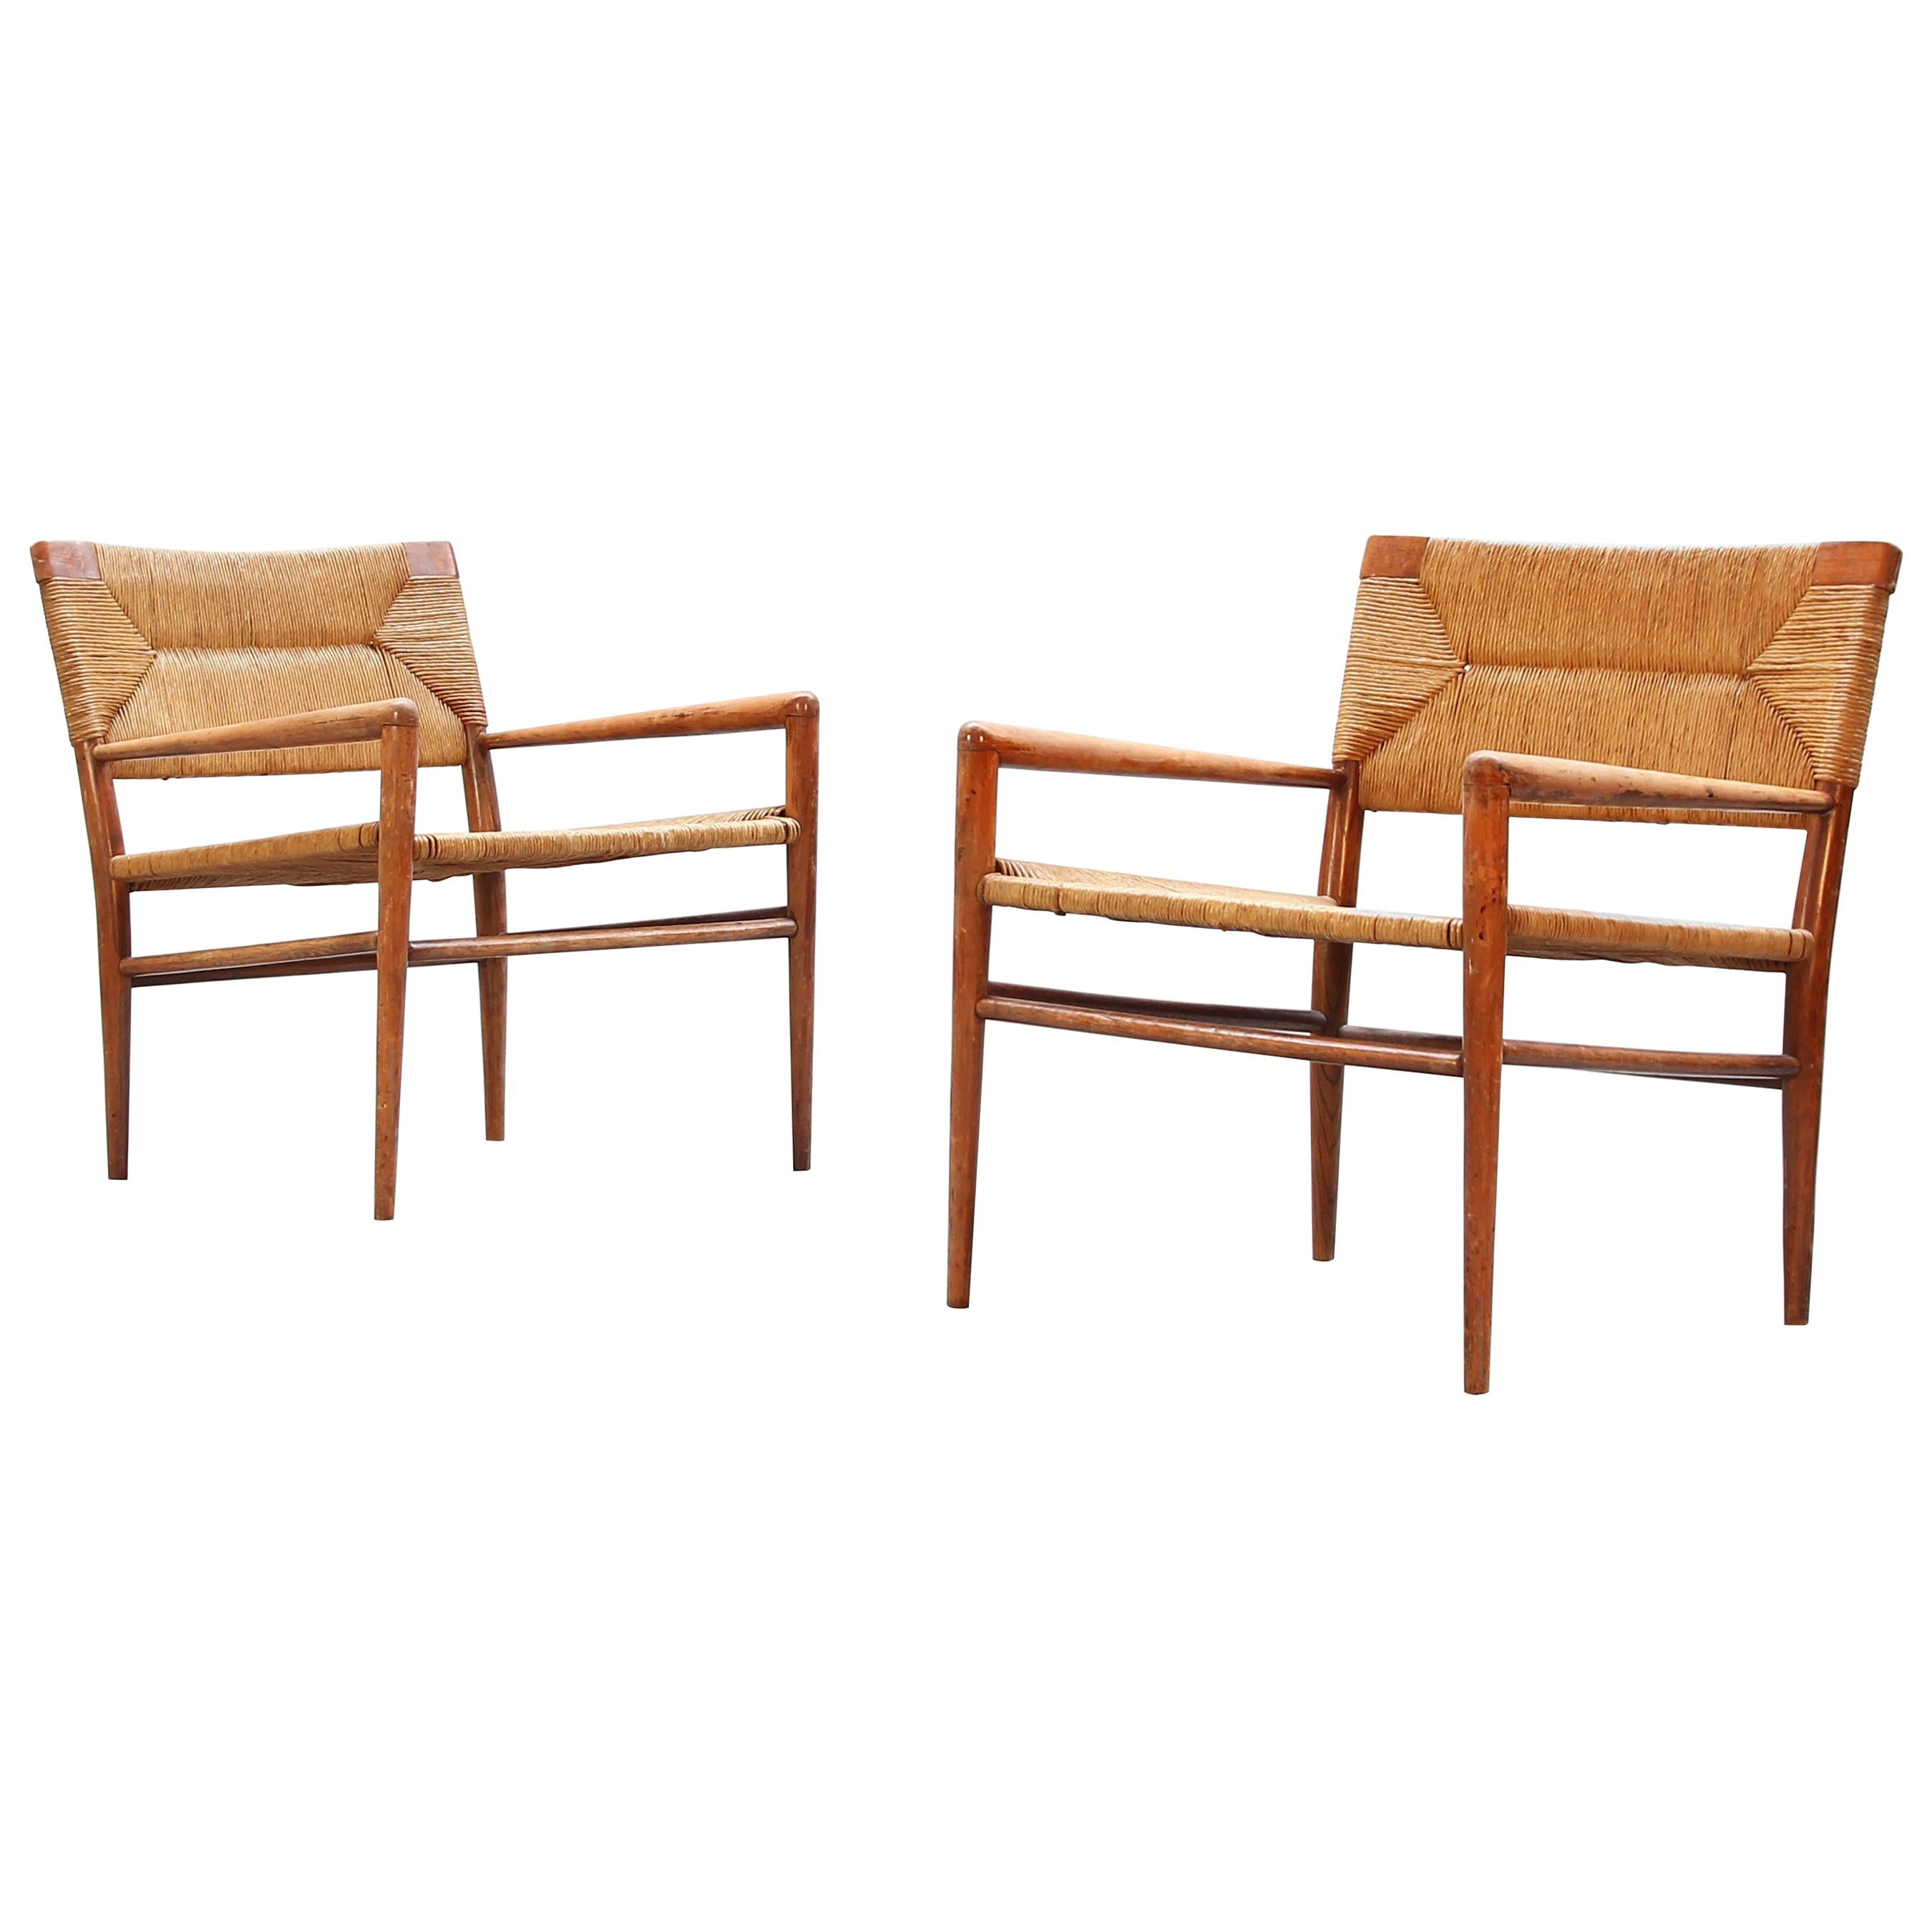 Pair of American Lounge Chairs by Mel Smilow for Smilow-Thielle 1950ies